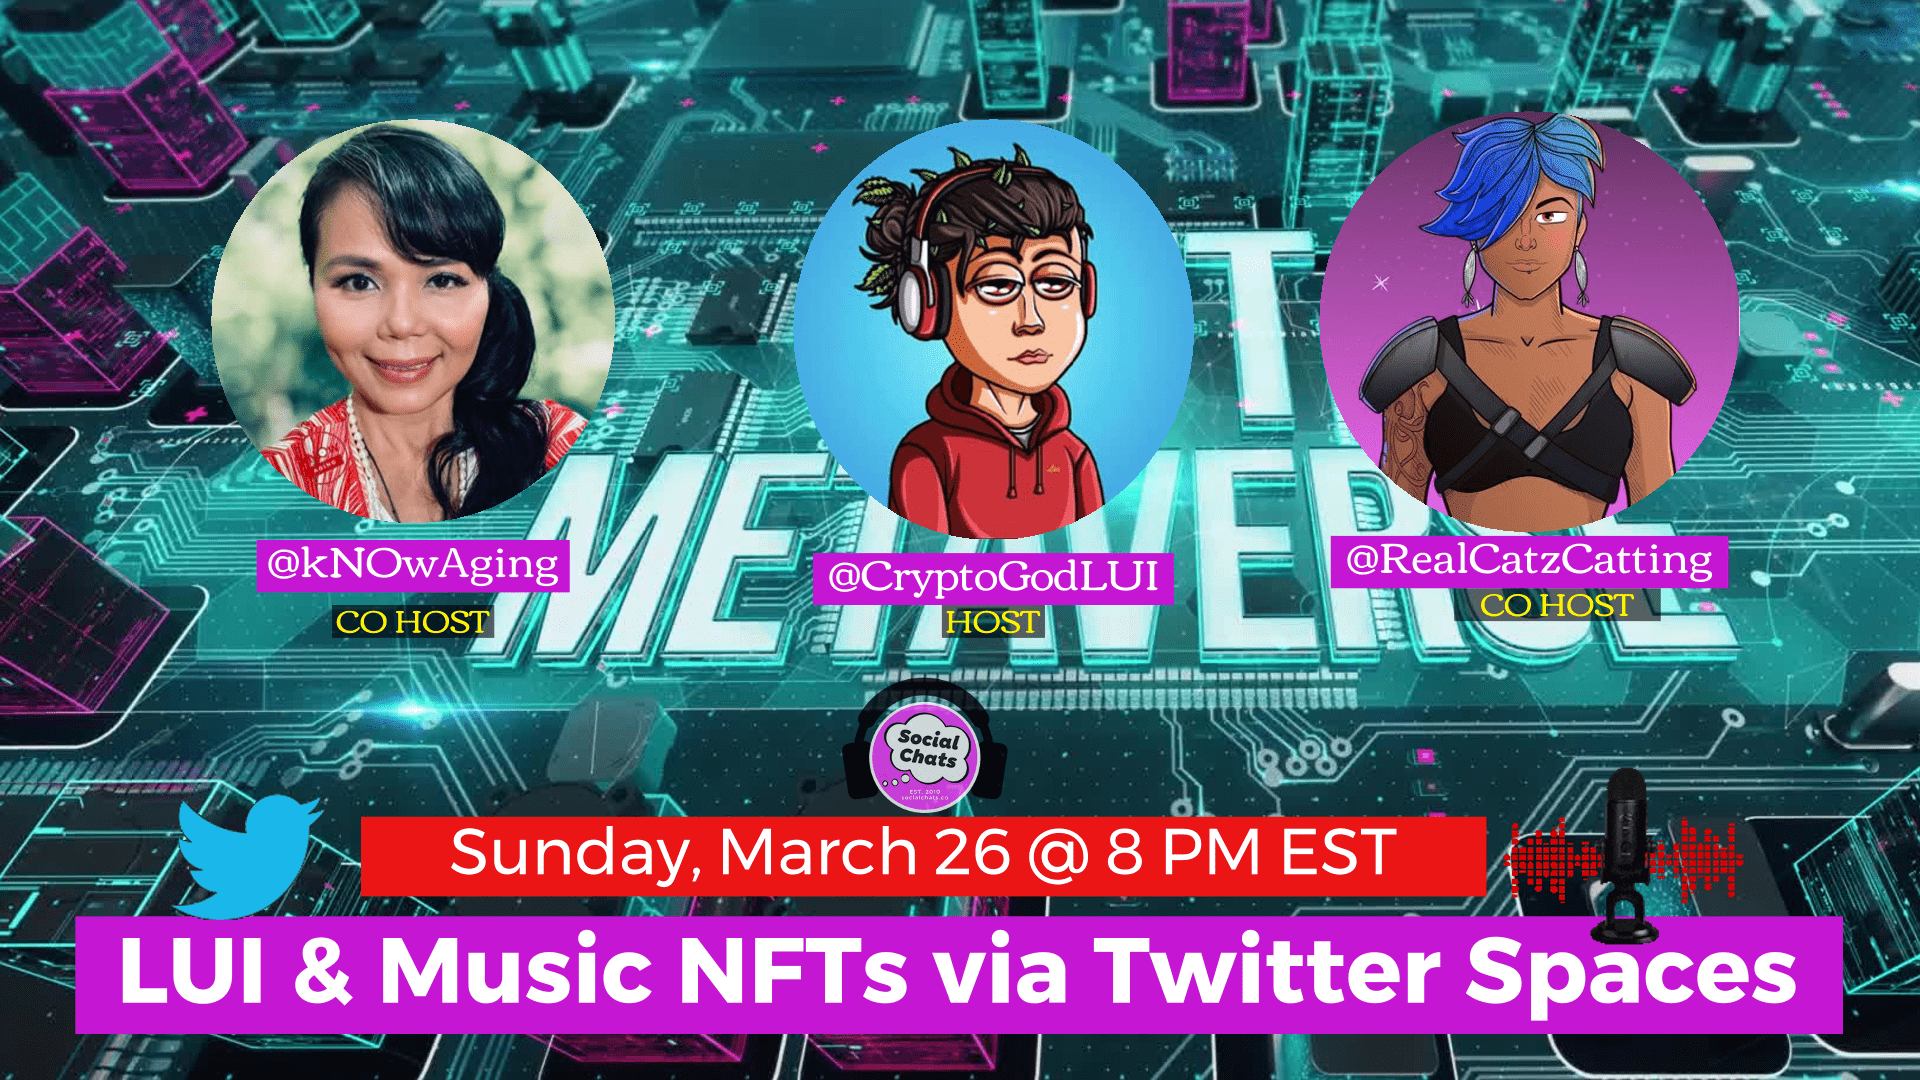 Join us TONIGHT @ 8 PM EST for another EPS of LUI & #MusicNFTs v/ @TwitterSpaces w/ @CryptoGodLui, @knowaging & @realcatzcatting!